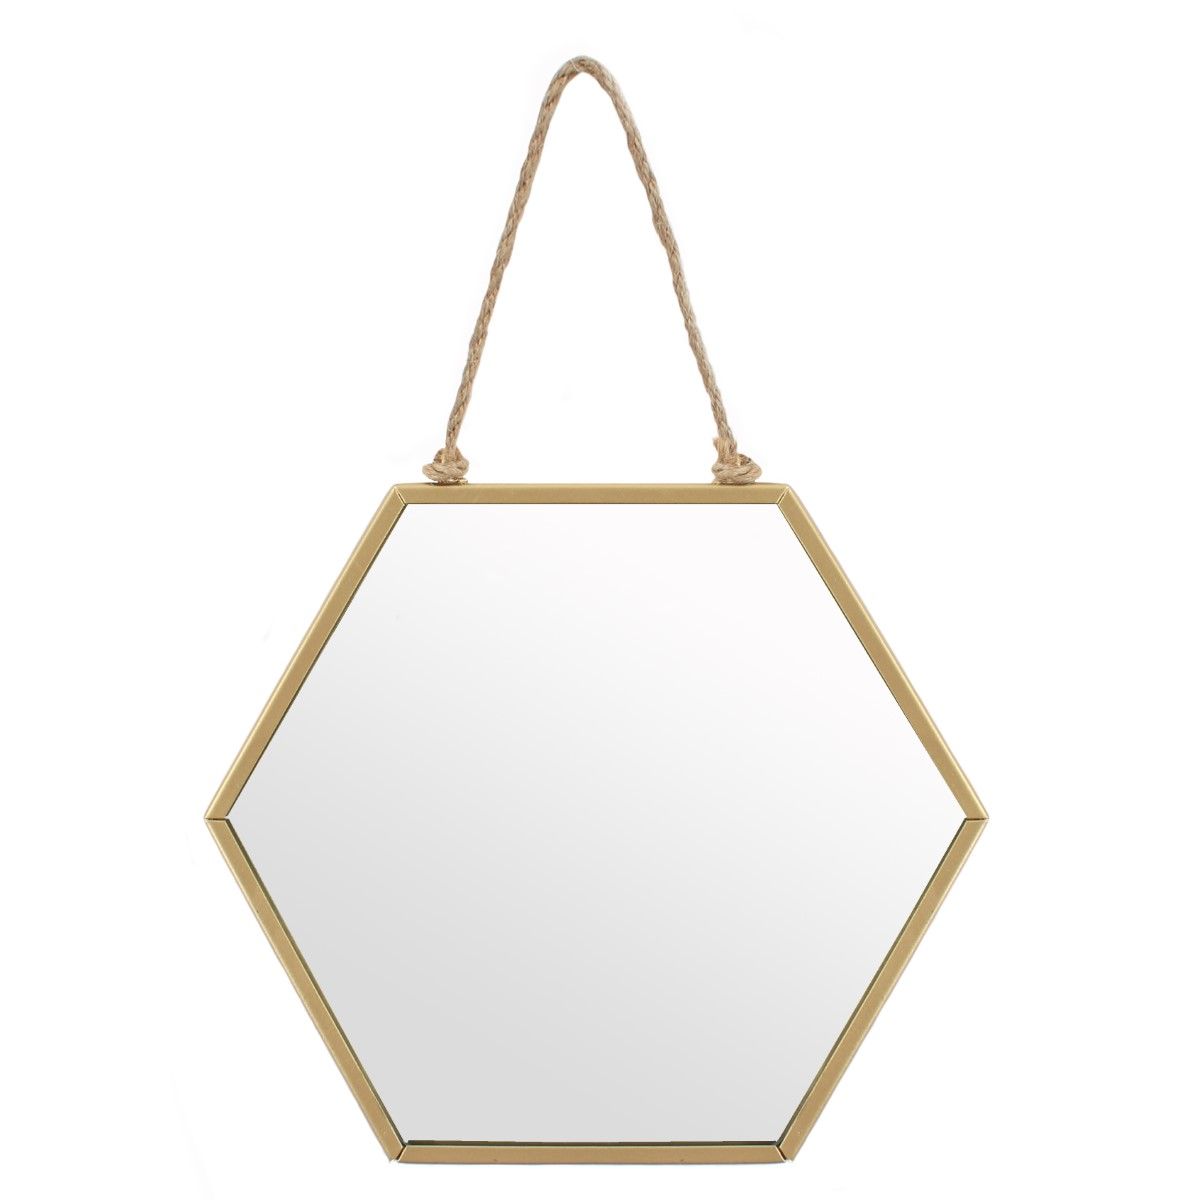 Something Different Small Gold Geometric Mirror